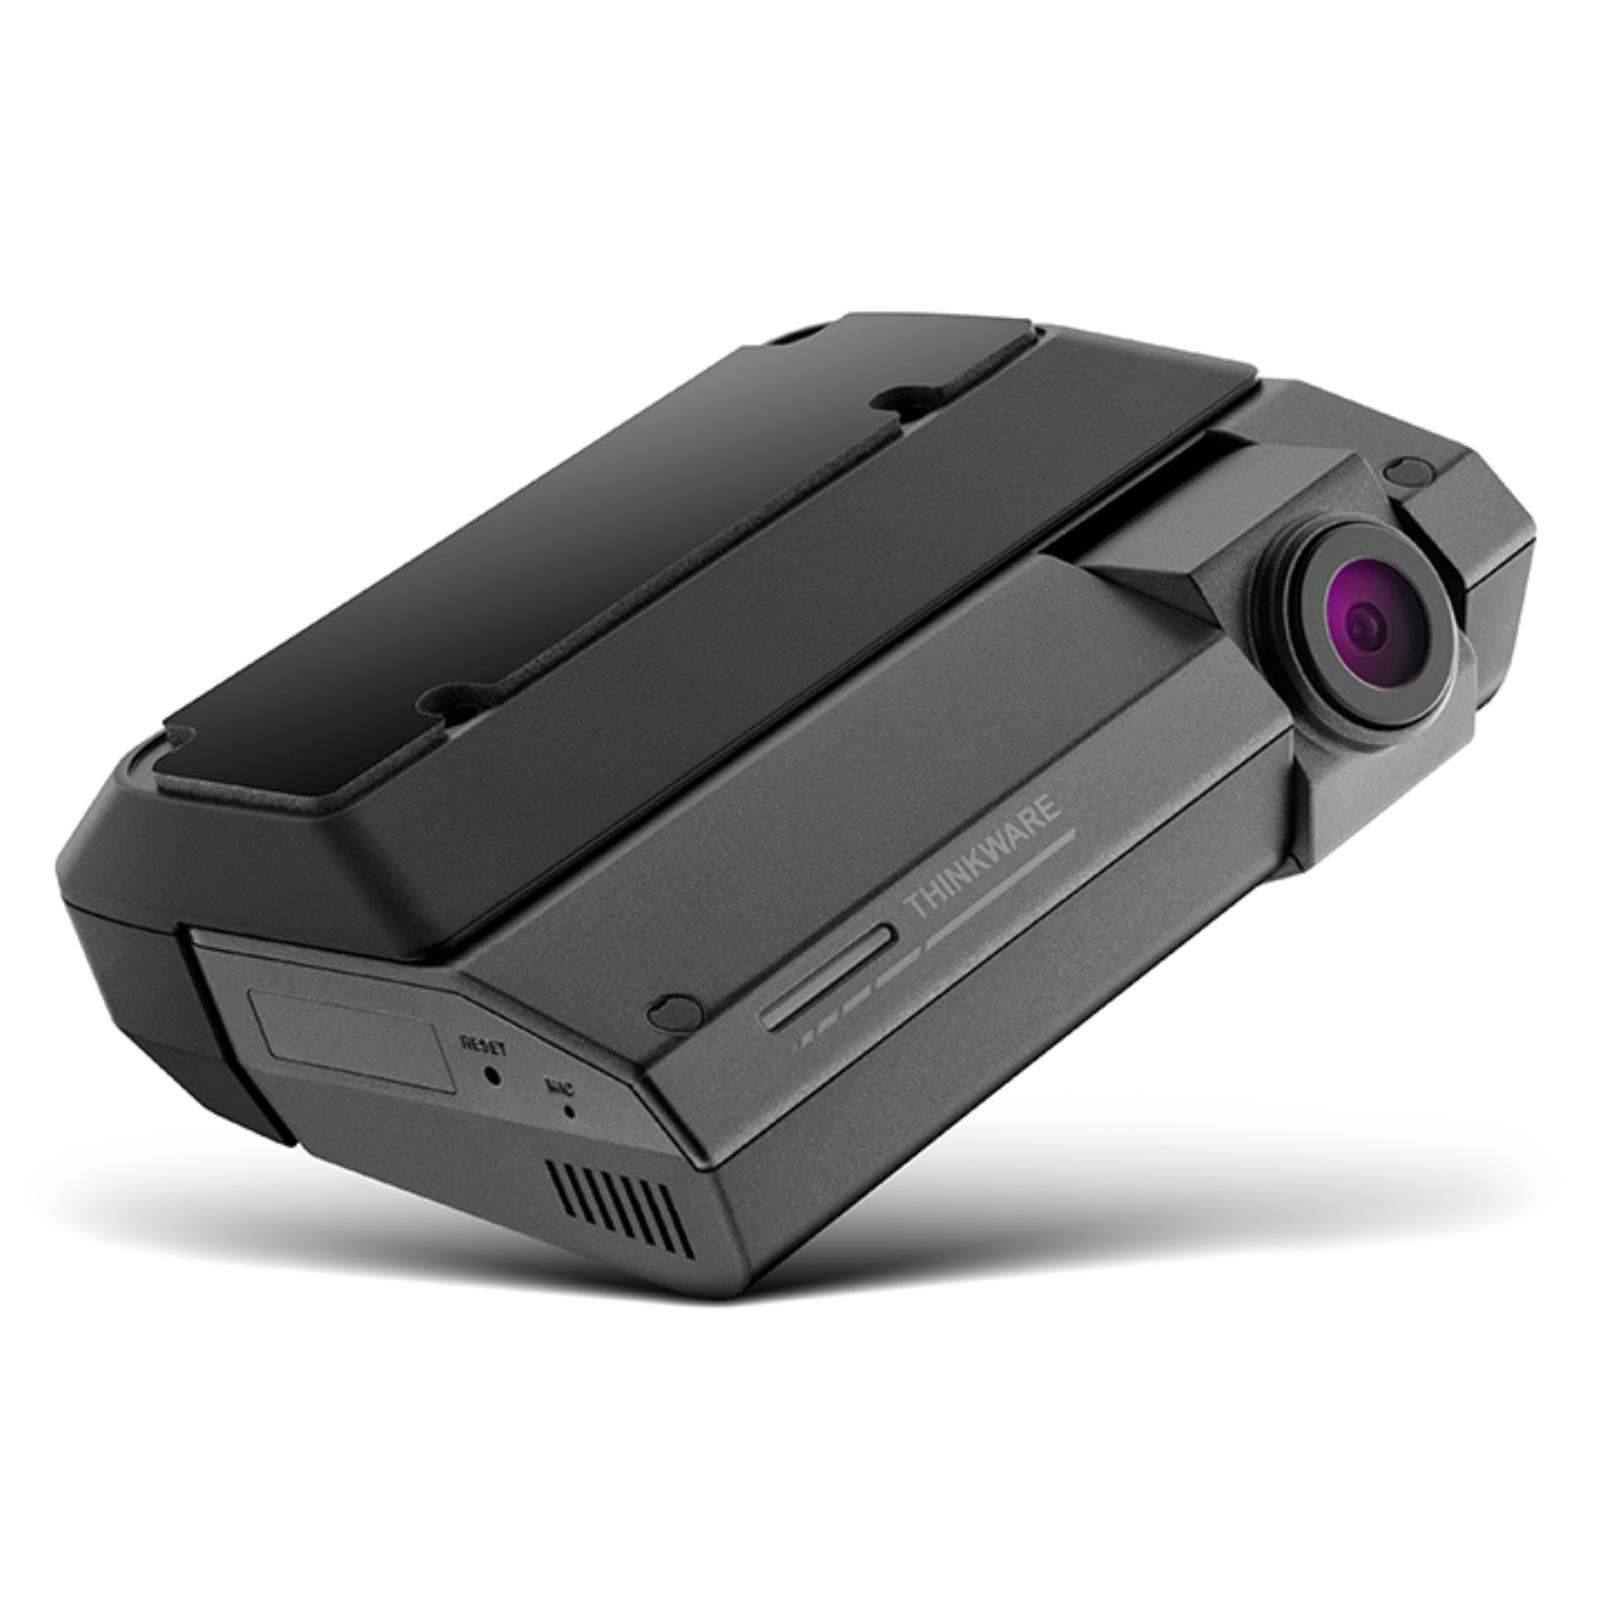 Thinkware Dash Cam F790 front and rear